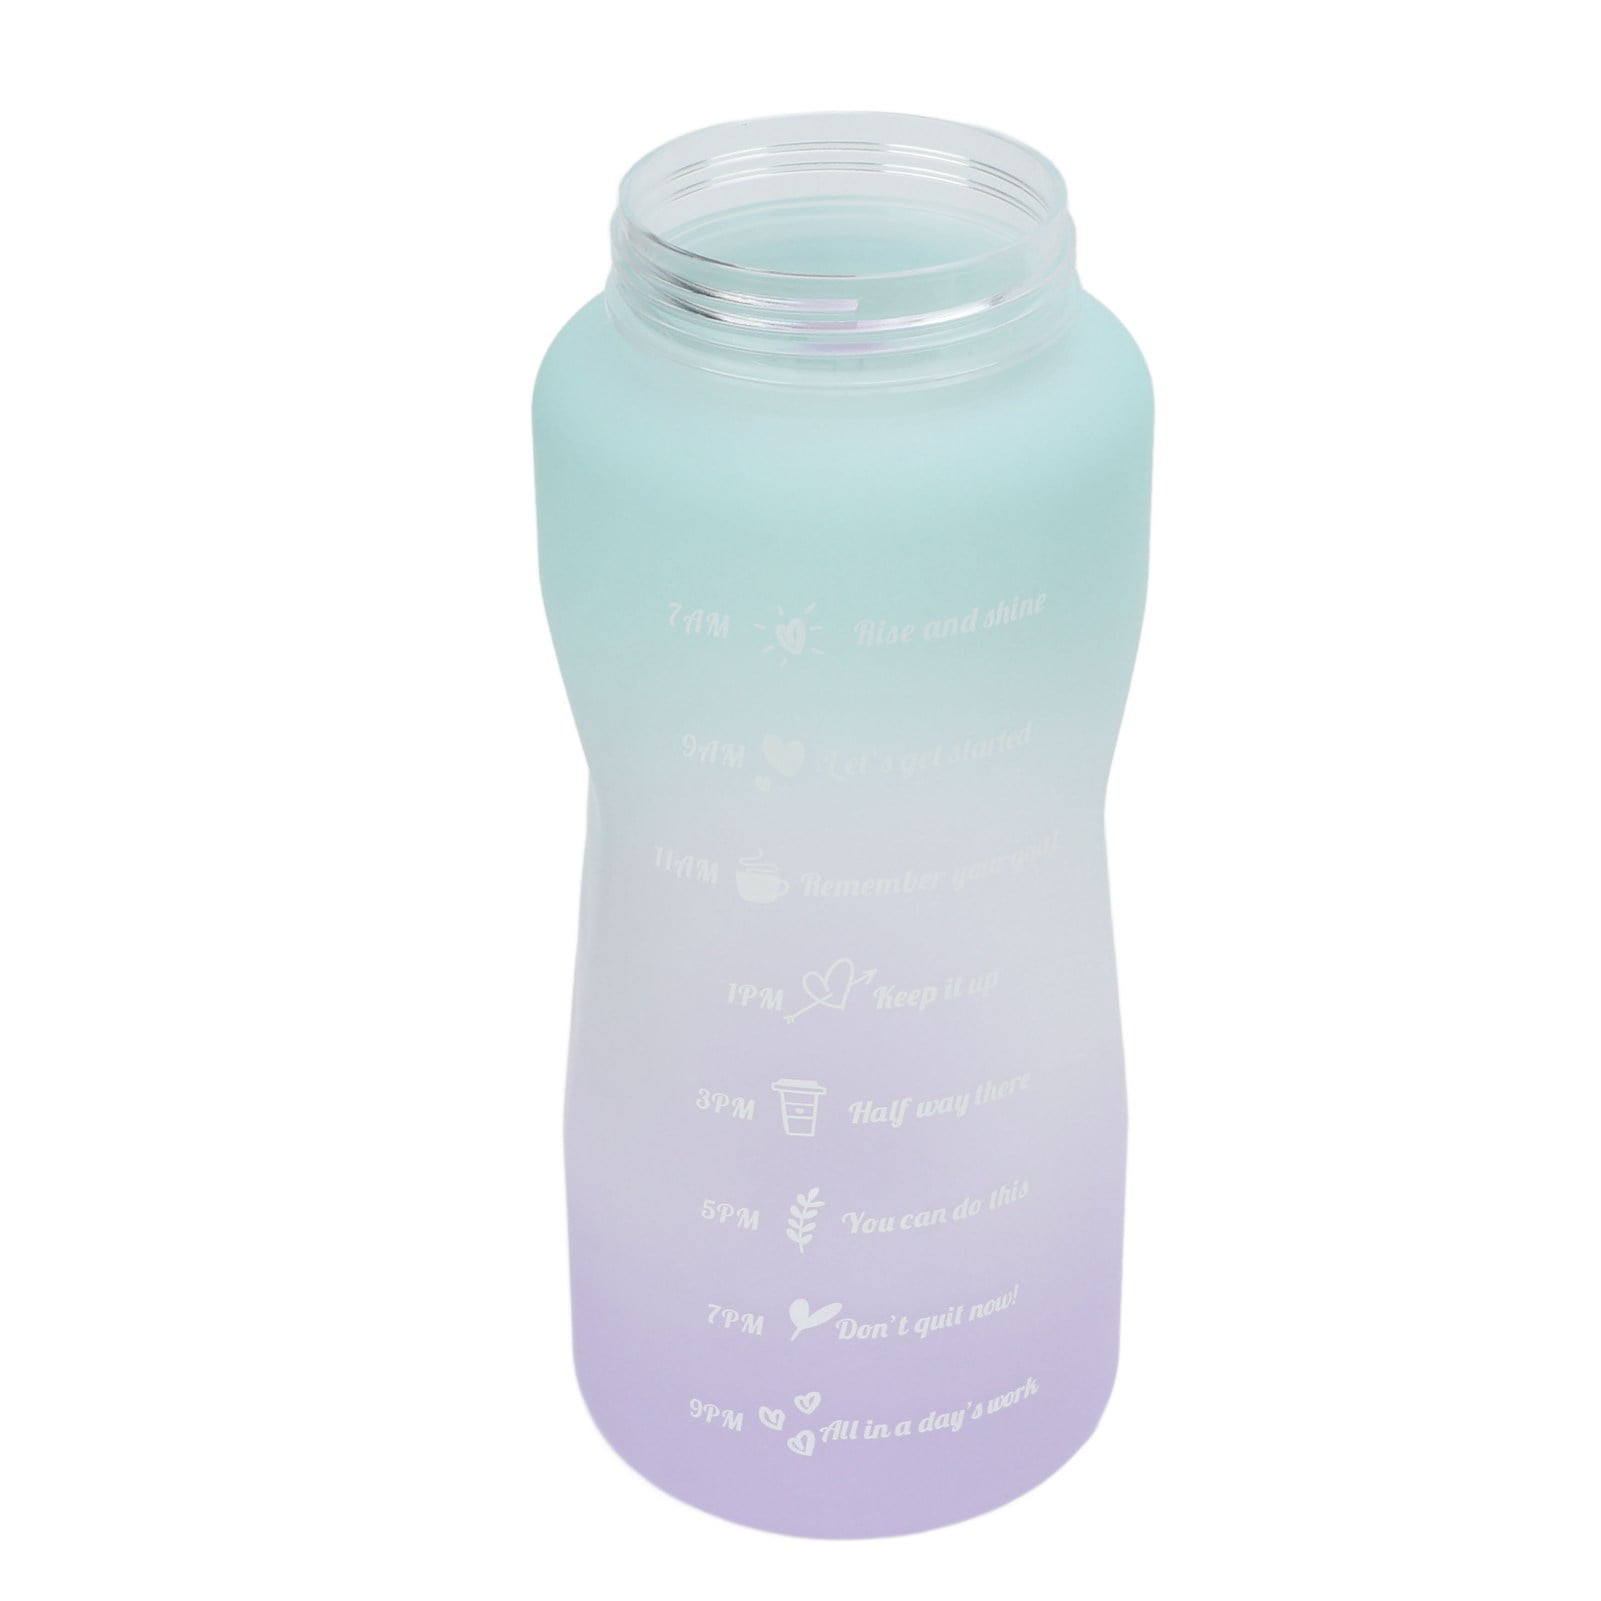 Slim and Stylish Water Bottle for On-the-Go Hydration – OhMyFurballs